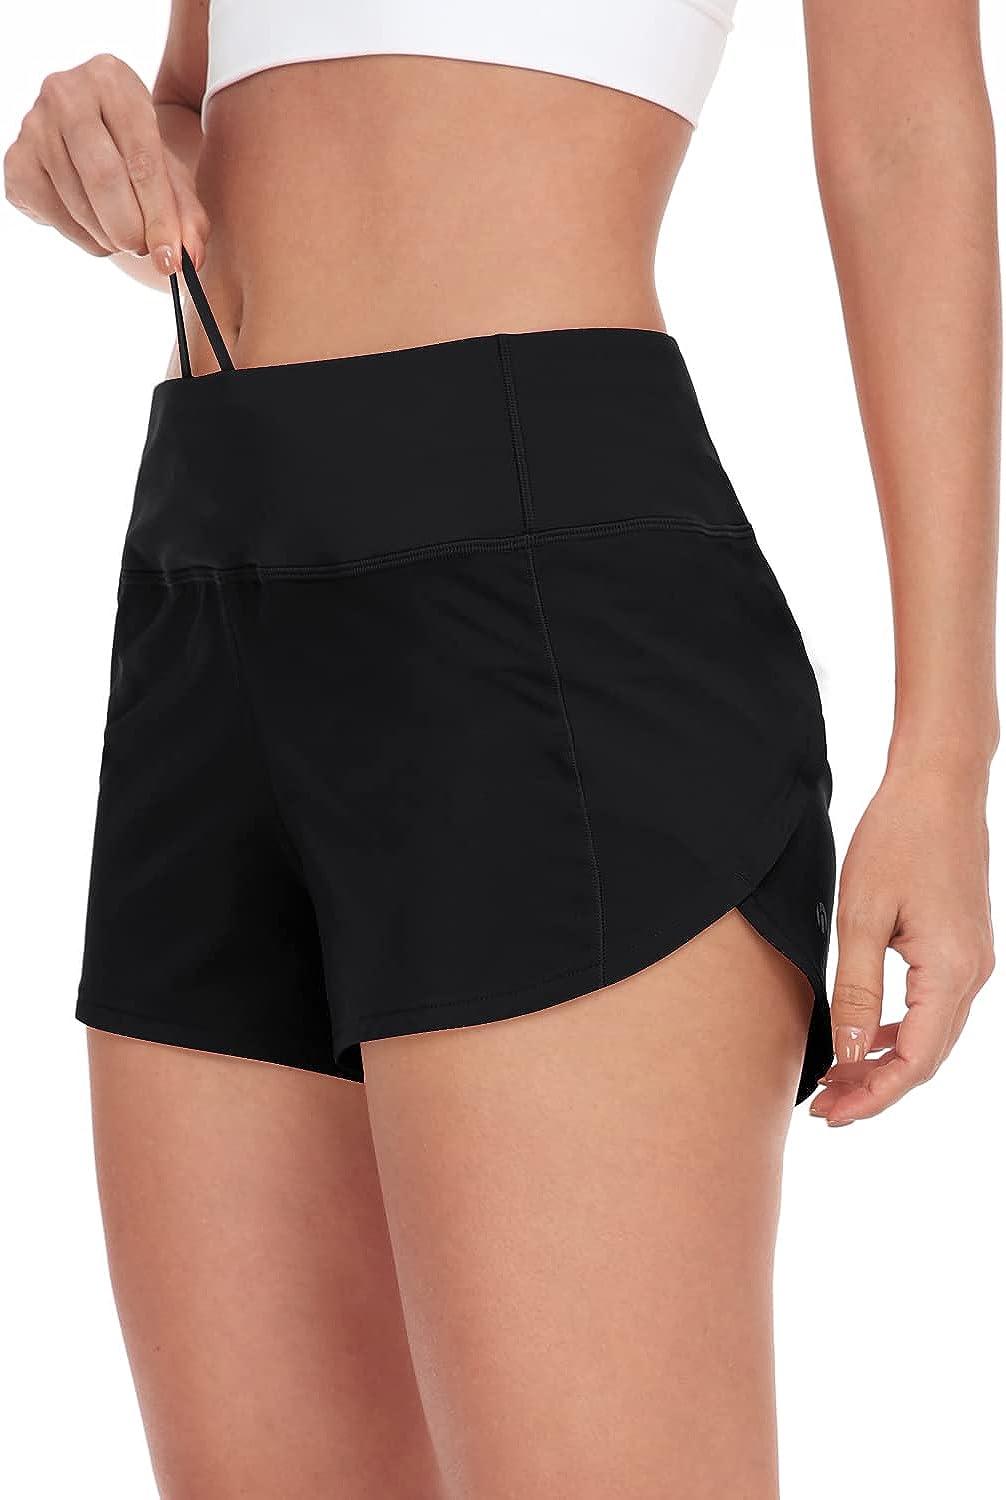 HeyNuts My Pace Running Shorts for Women, Mid  